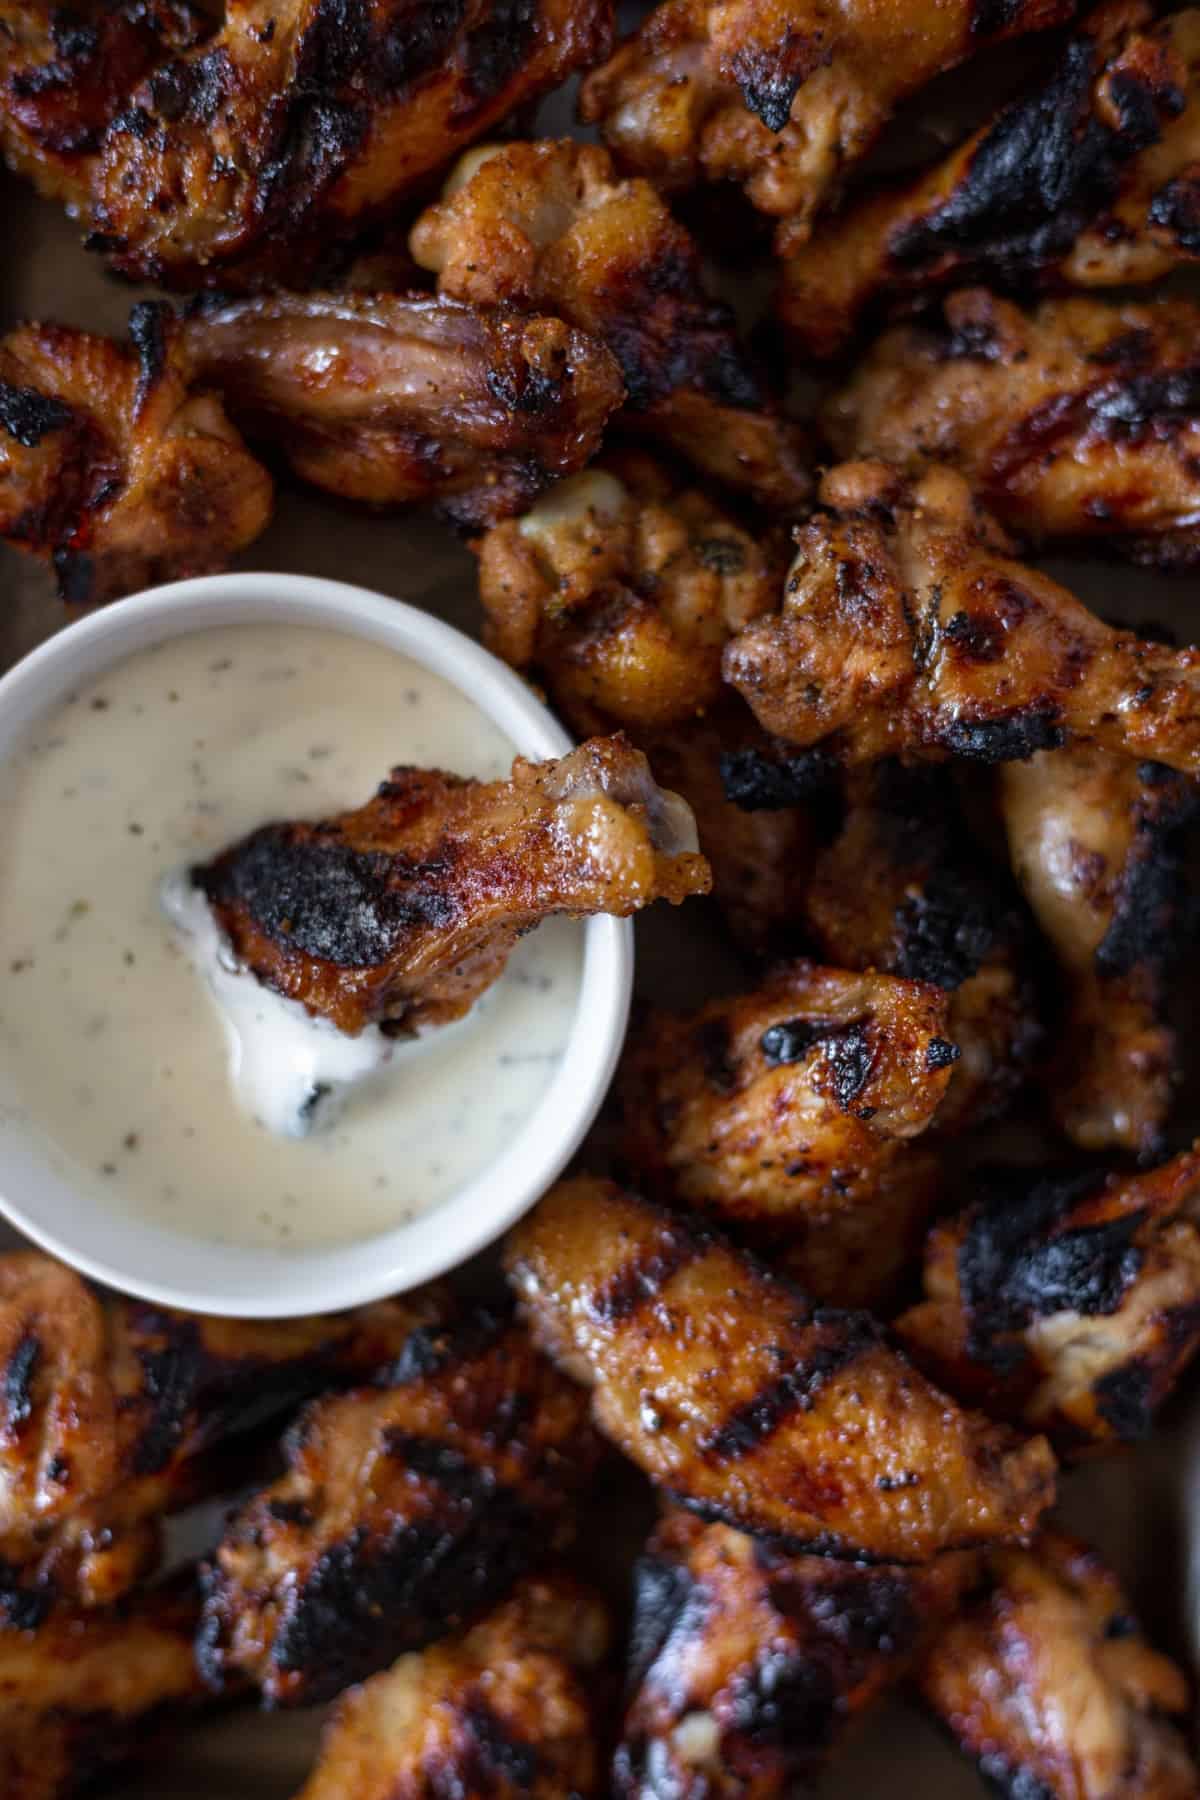 A platter of grilled and brined chicken wings with a side of ranch